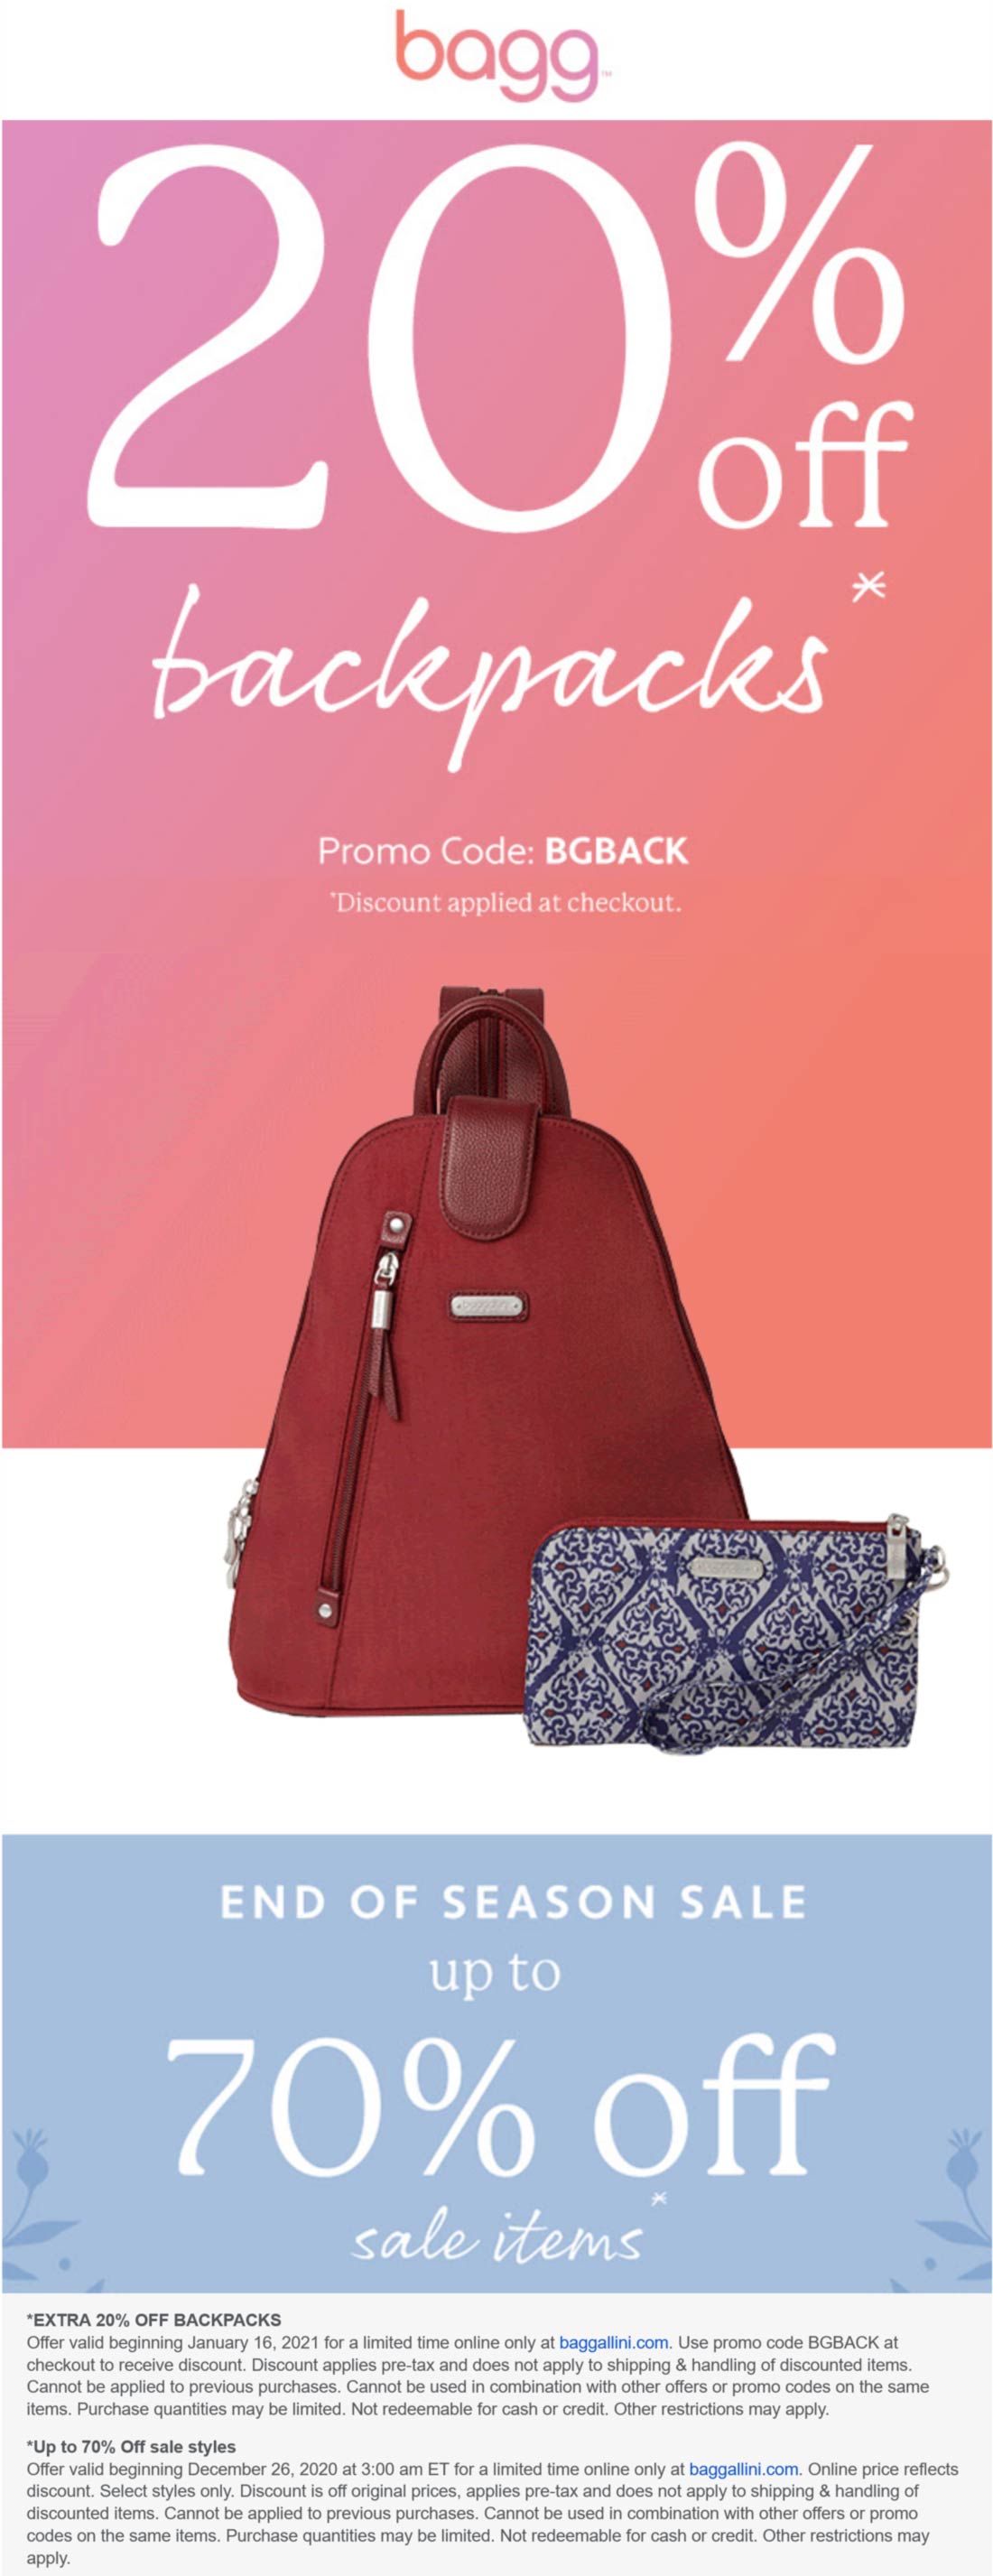 baggallini stores Coupon  Extra 20% off backpacks today at baggallini via promo code BGBACK #baggallini 